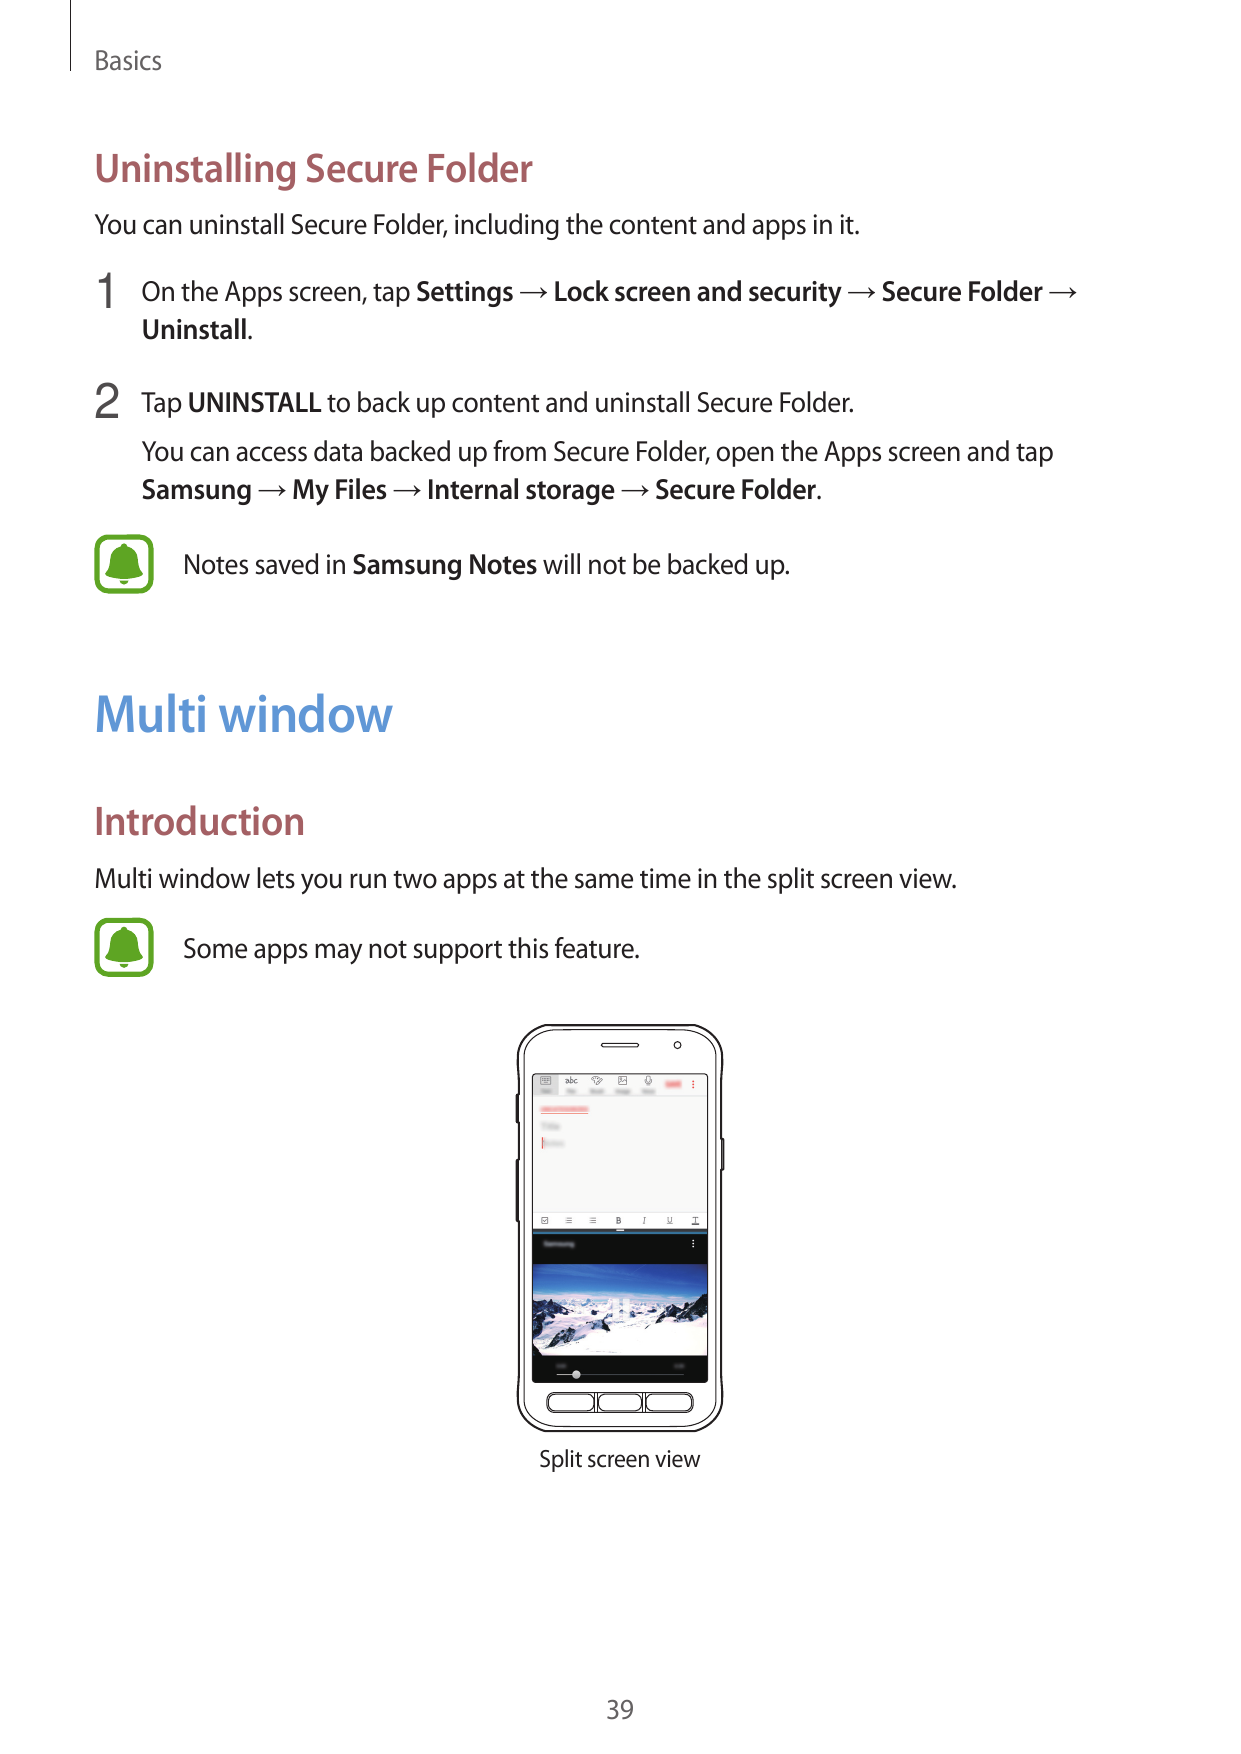 BasicsUninstalling Secure FolderYou can uninstall Secure Folder, including the content and apps in it.1 On the Apps screen, tap 